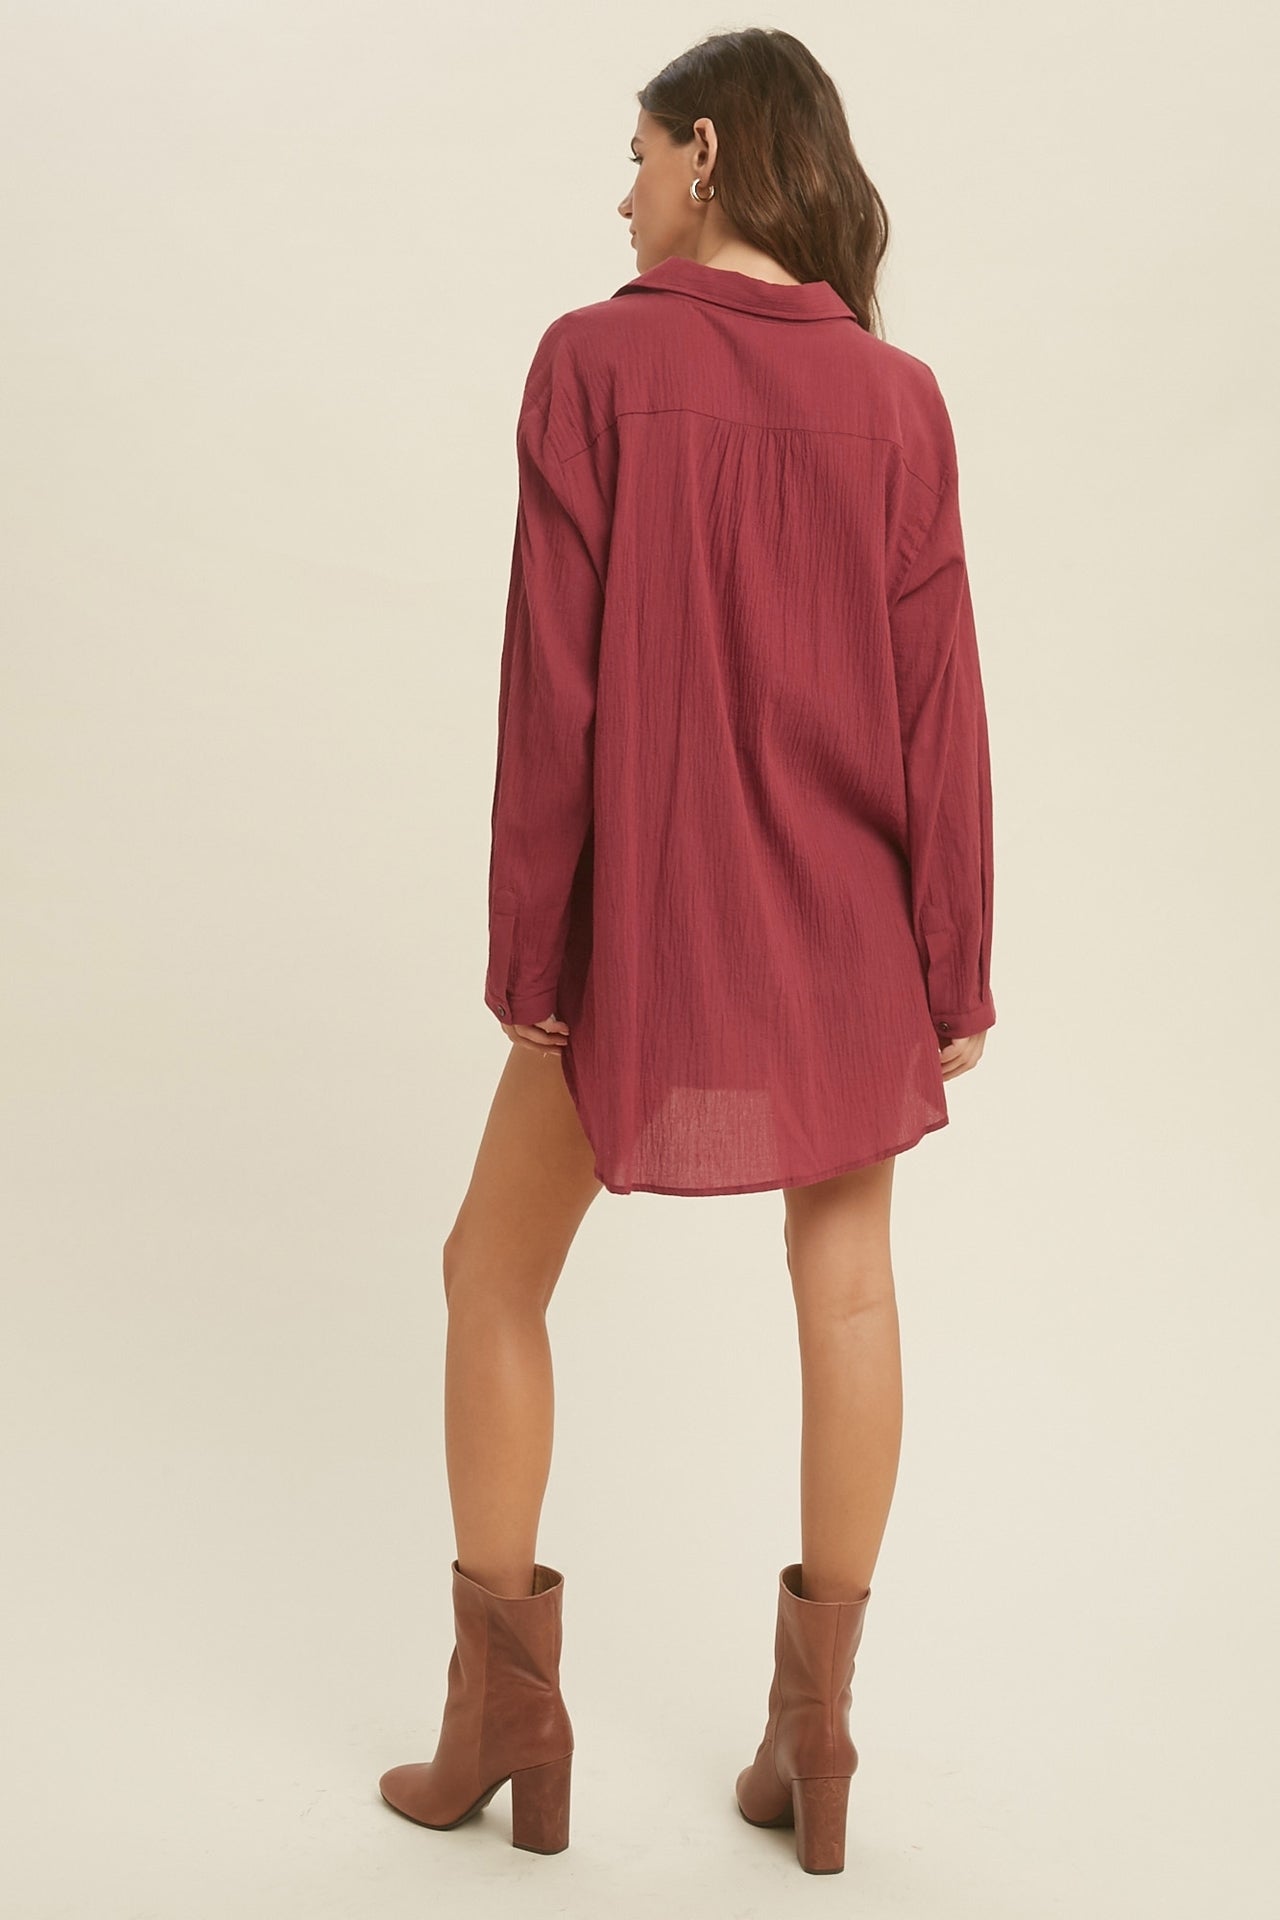 Showing a model wearing the Button Down Tunic Top in sienna color. A back view.